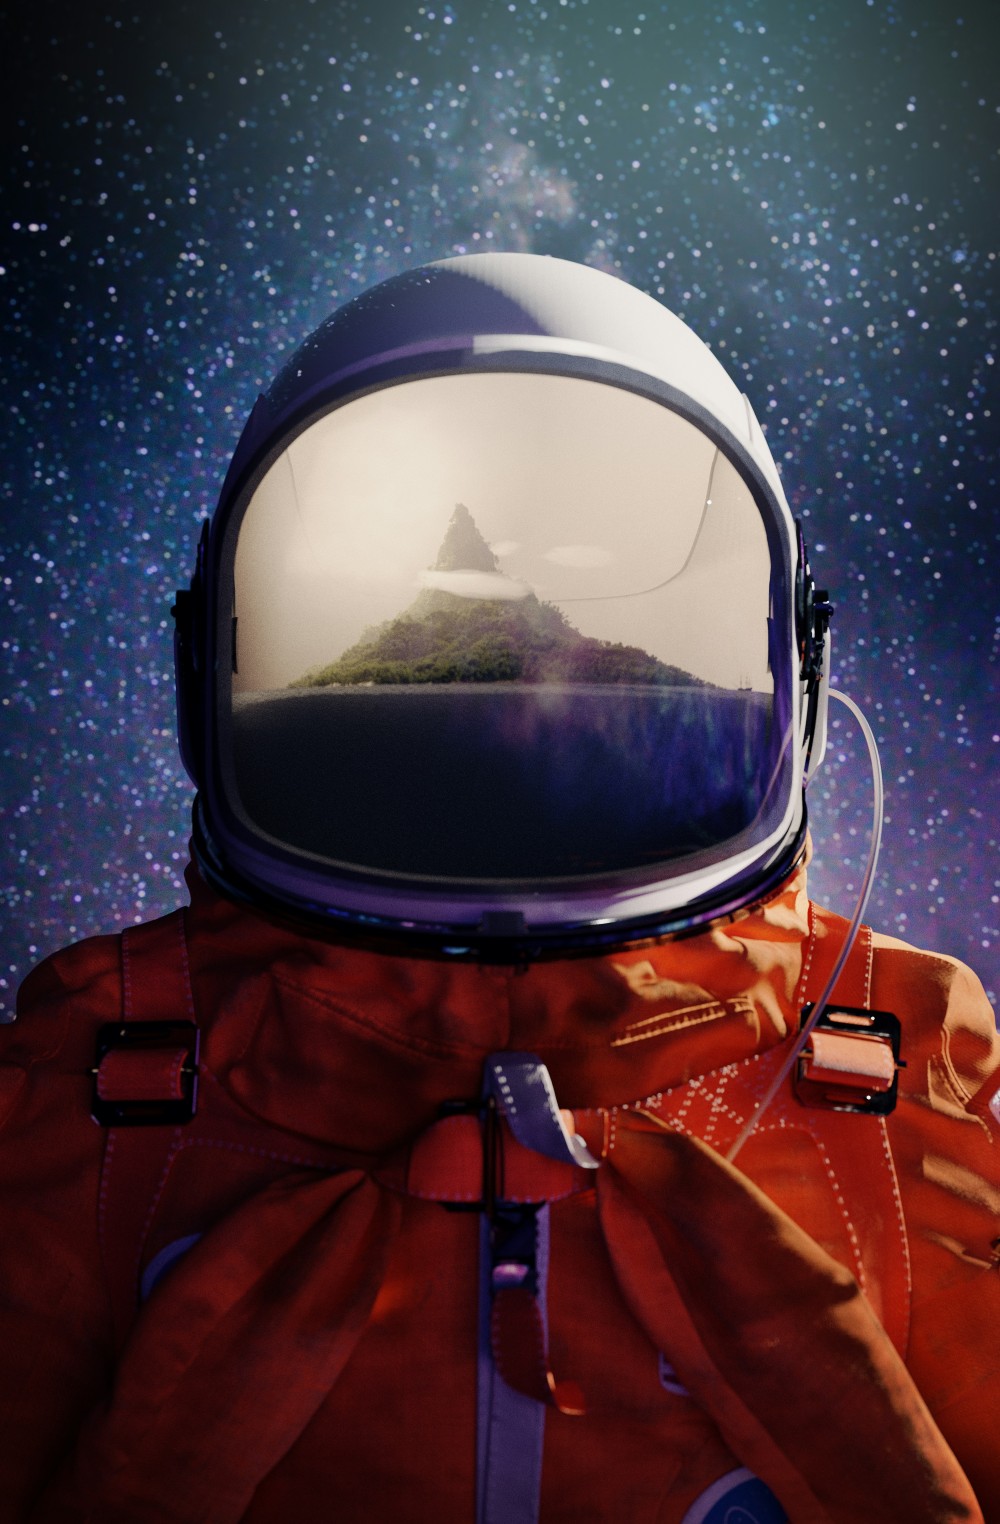 An Astronaut floating in space with the reflection of a mountain in their visor